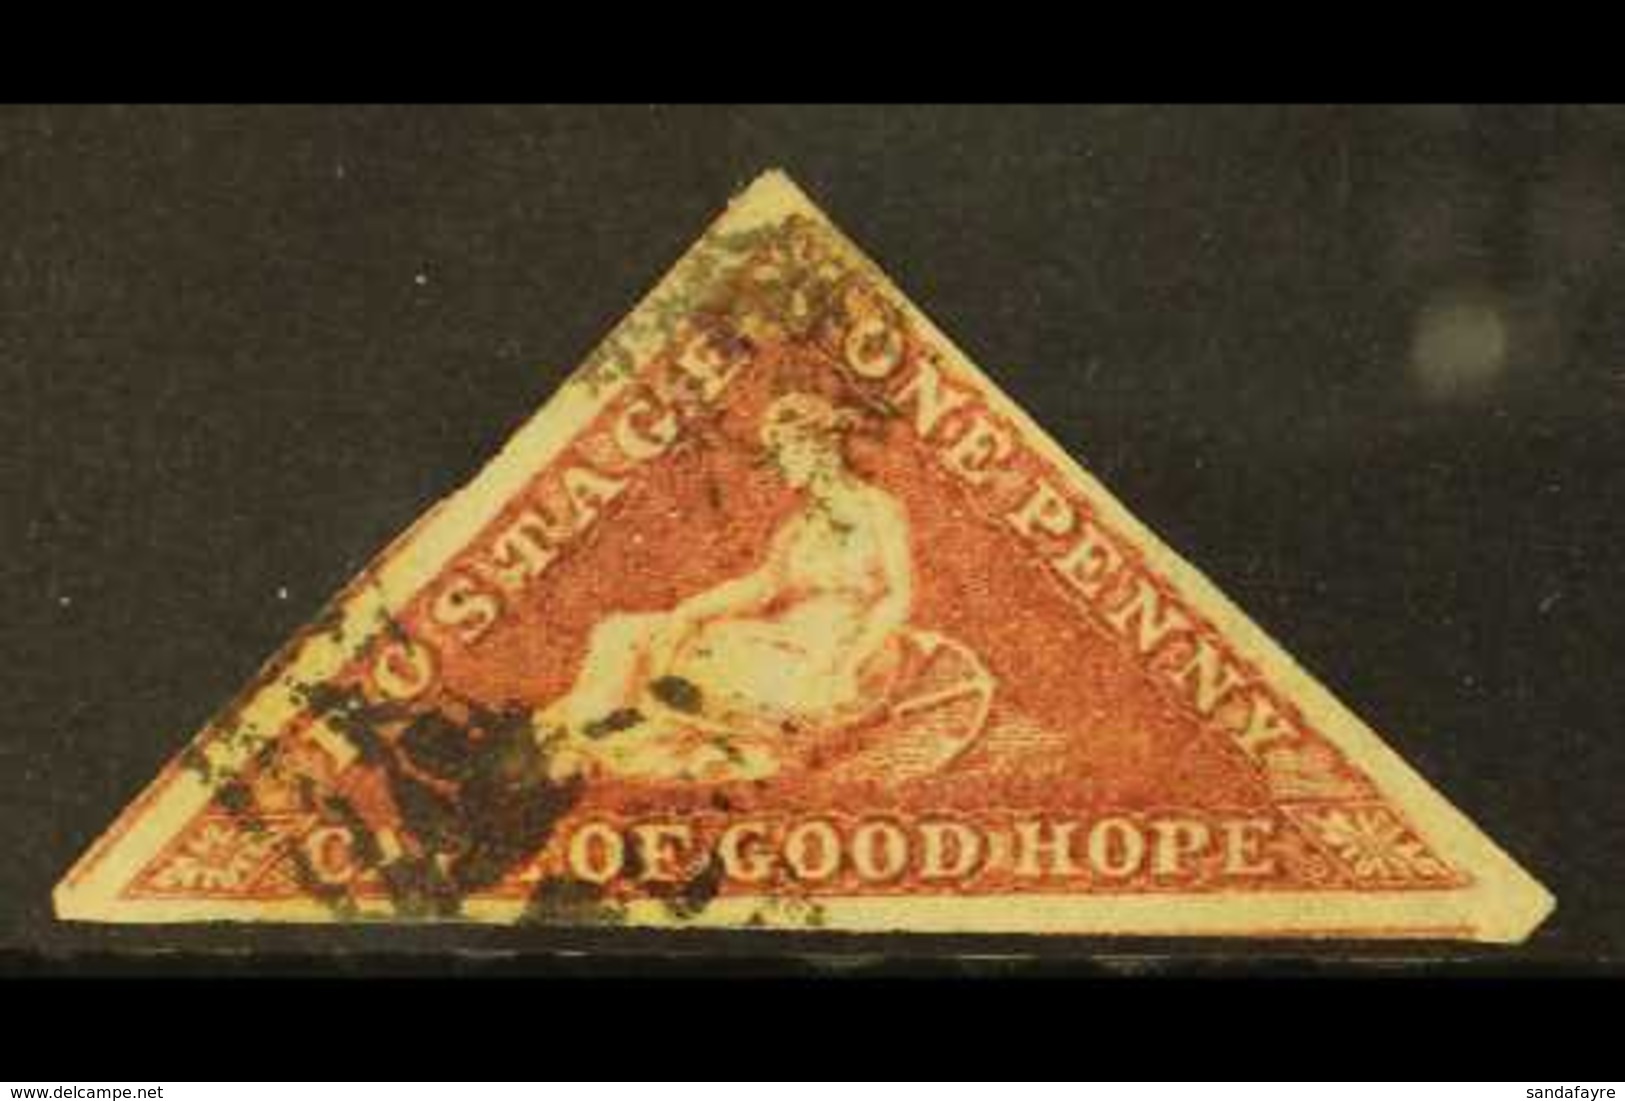 CAPE OF GOOD HOPE 1855-63 1d Deep Rose Red, SG 5b, Used With 3 Clear Margins (1 Stamp) For More Images, Please Visit Htt - Unclassified